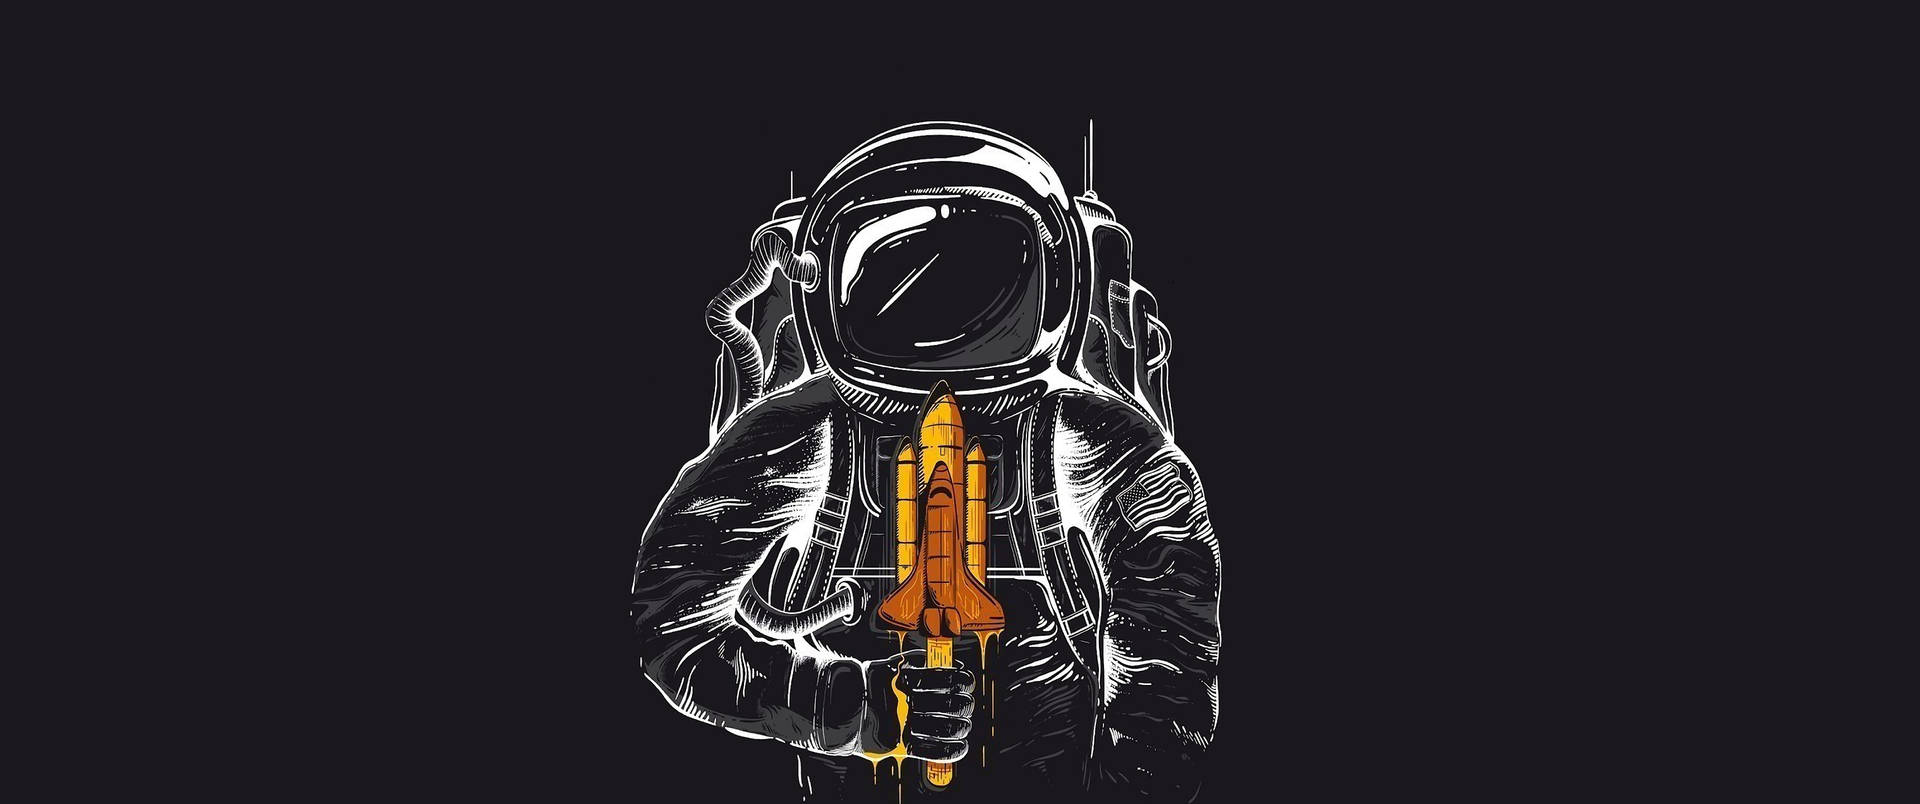 Space Aesthetic Wallpaper Images